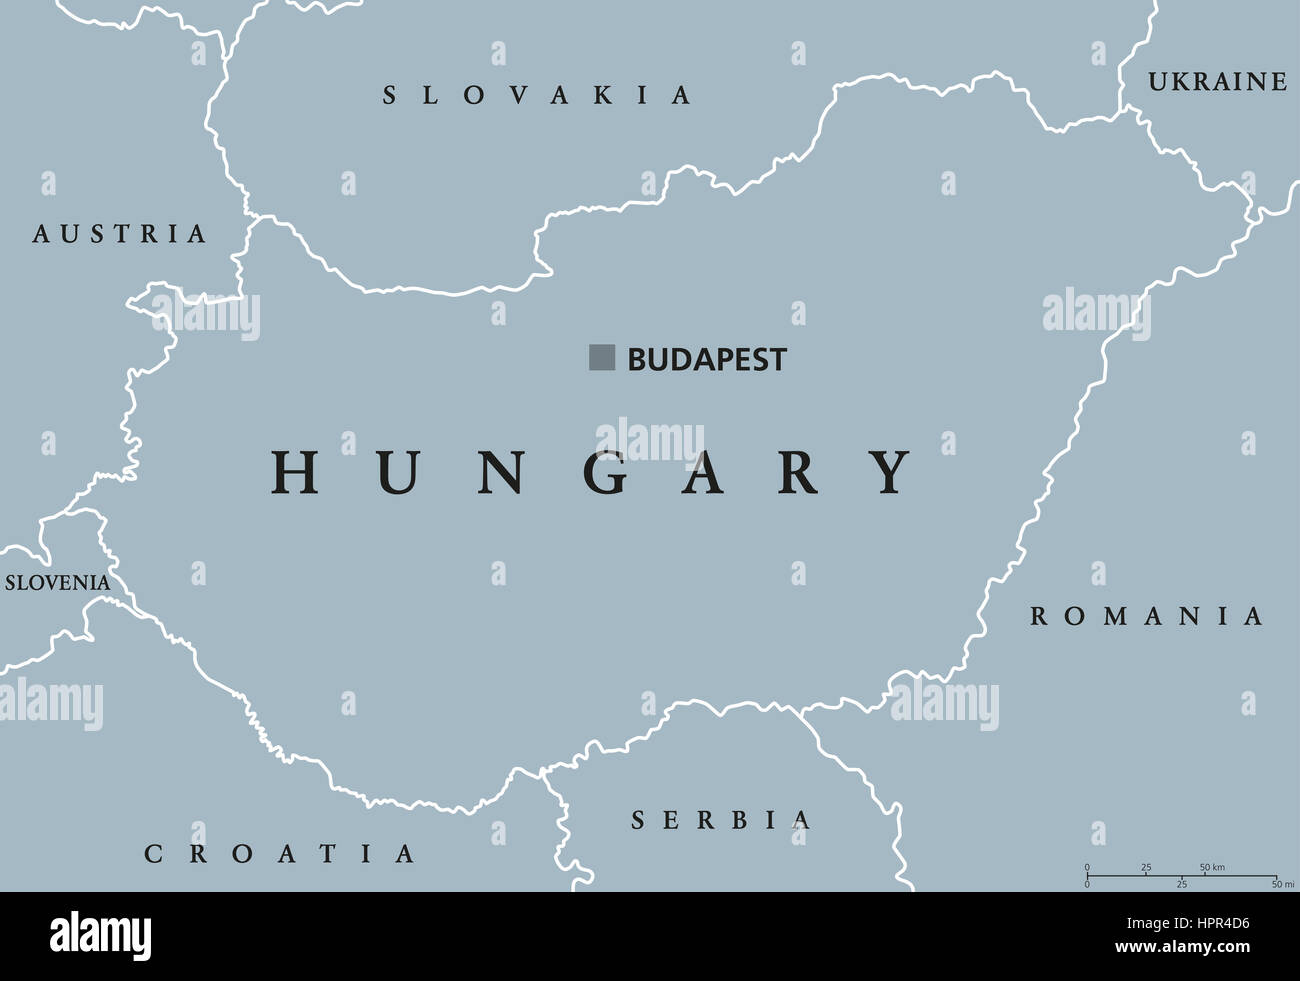 Hungary political map with capital Budapest, national borders and neighbor countries. Unitary parliamentary republic in Central Europe. Stock Photo